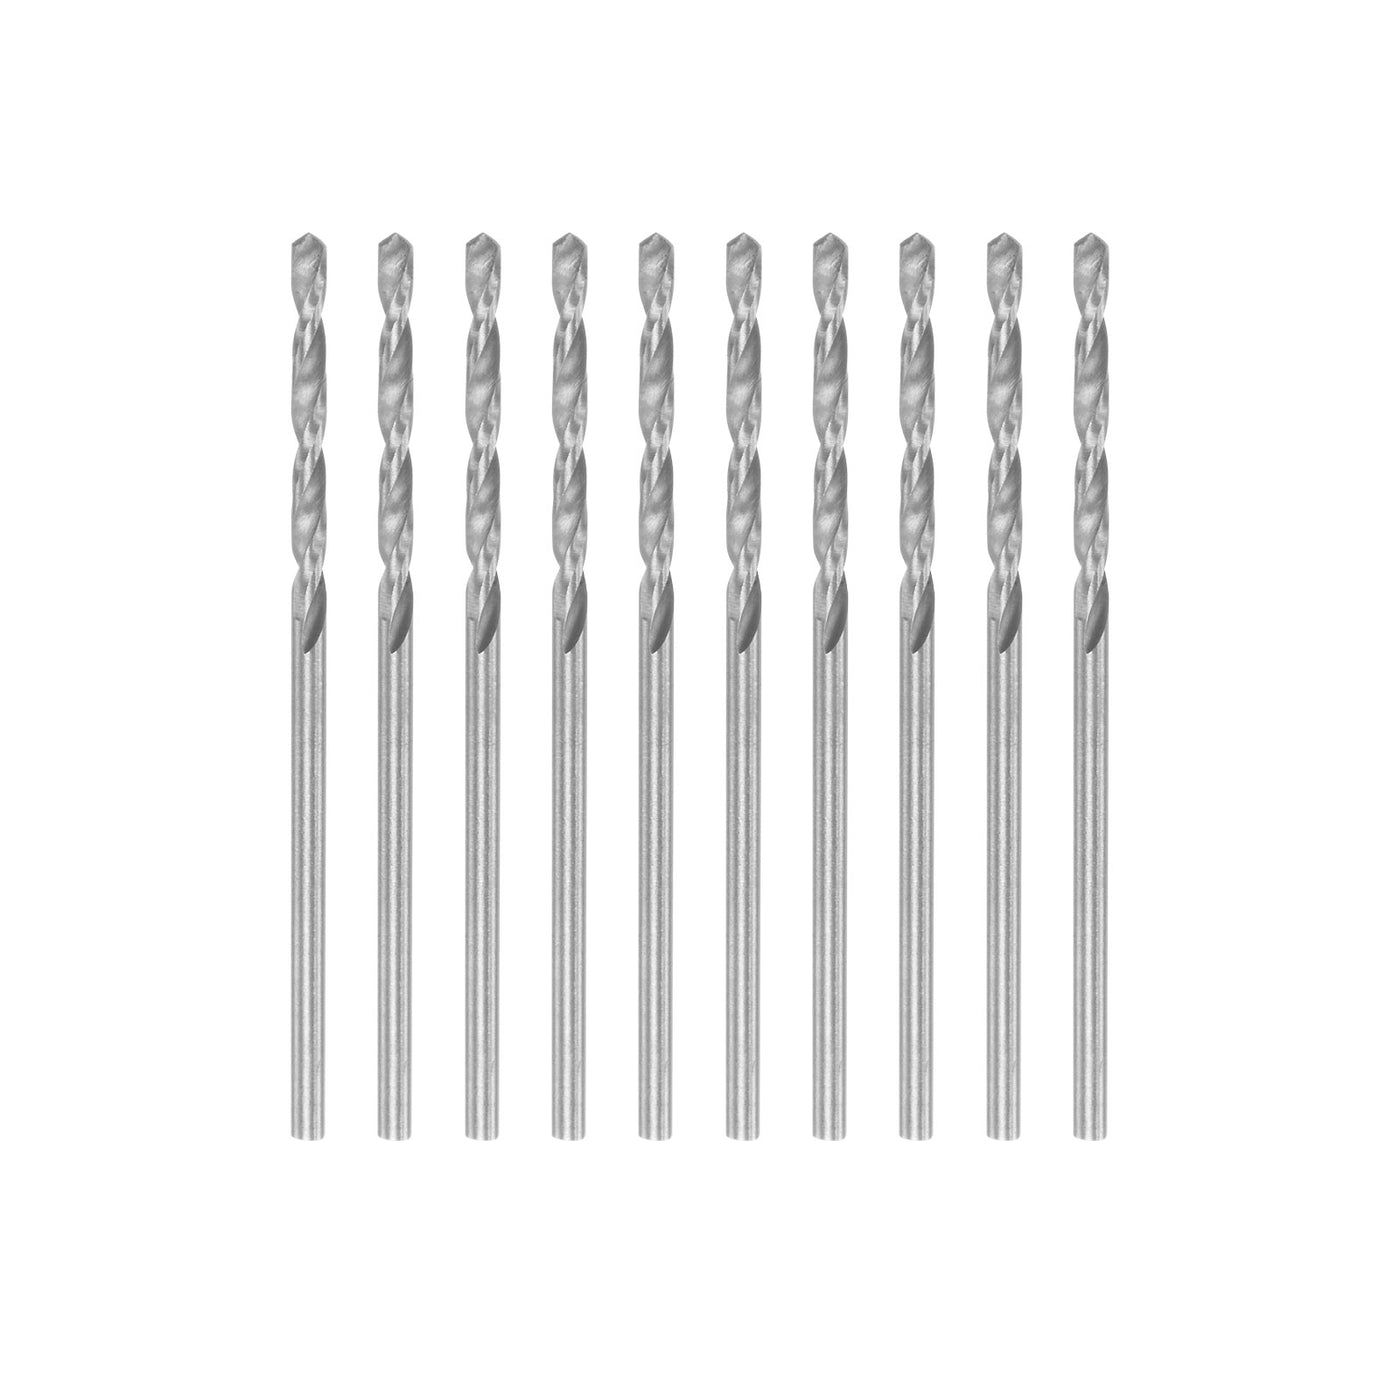 uxcell Uxcell 10 Pcs 1.65mm High Speed Steel Drill Bits, Fully Ground 43mm Length Drill Bit